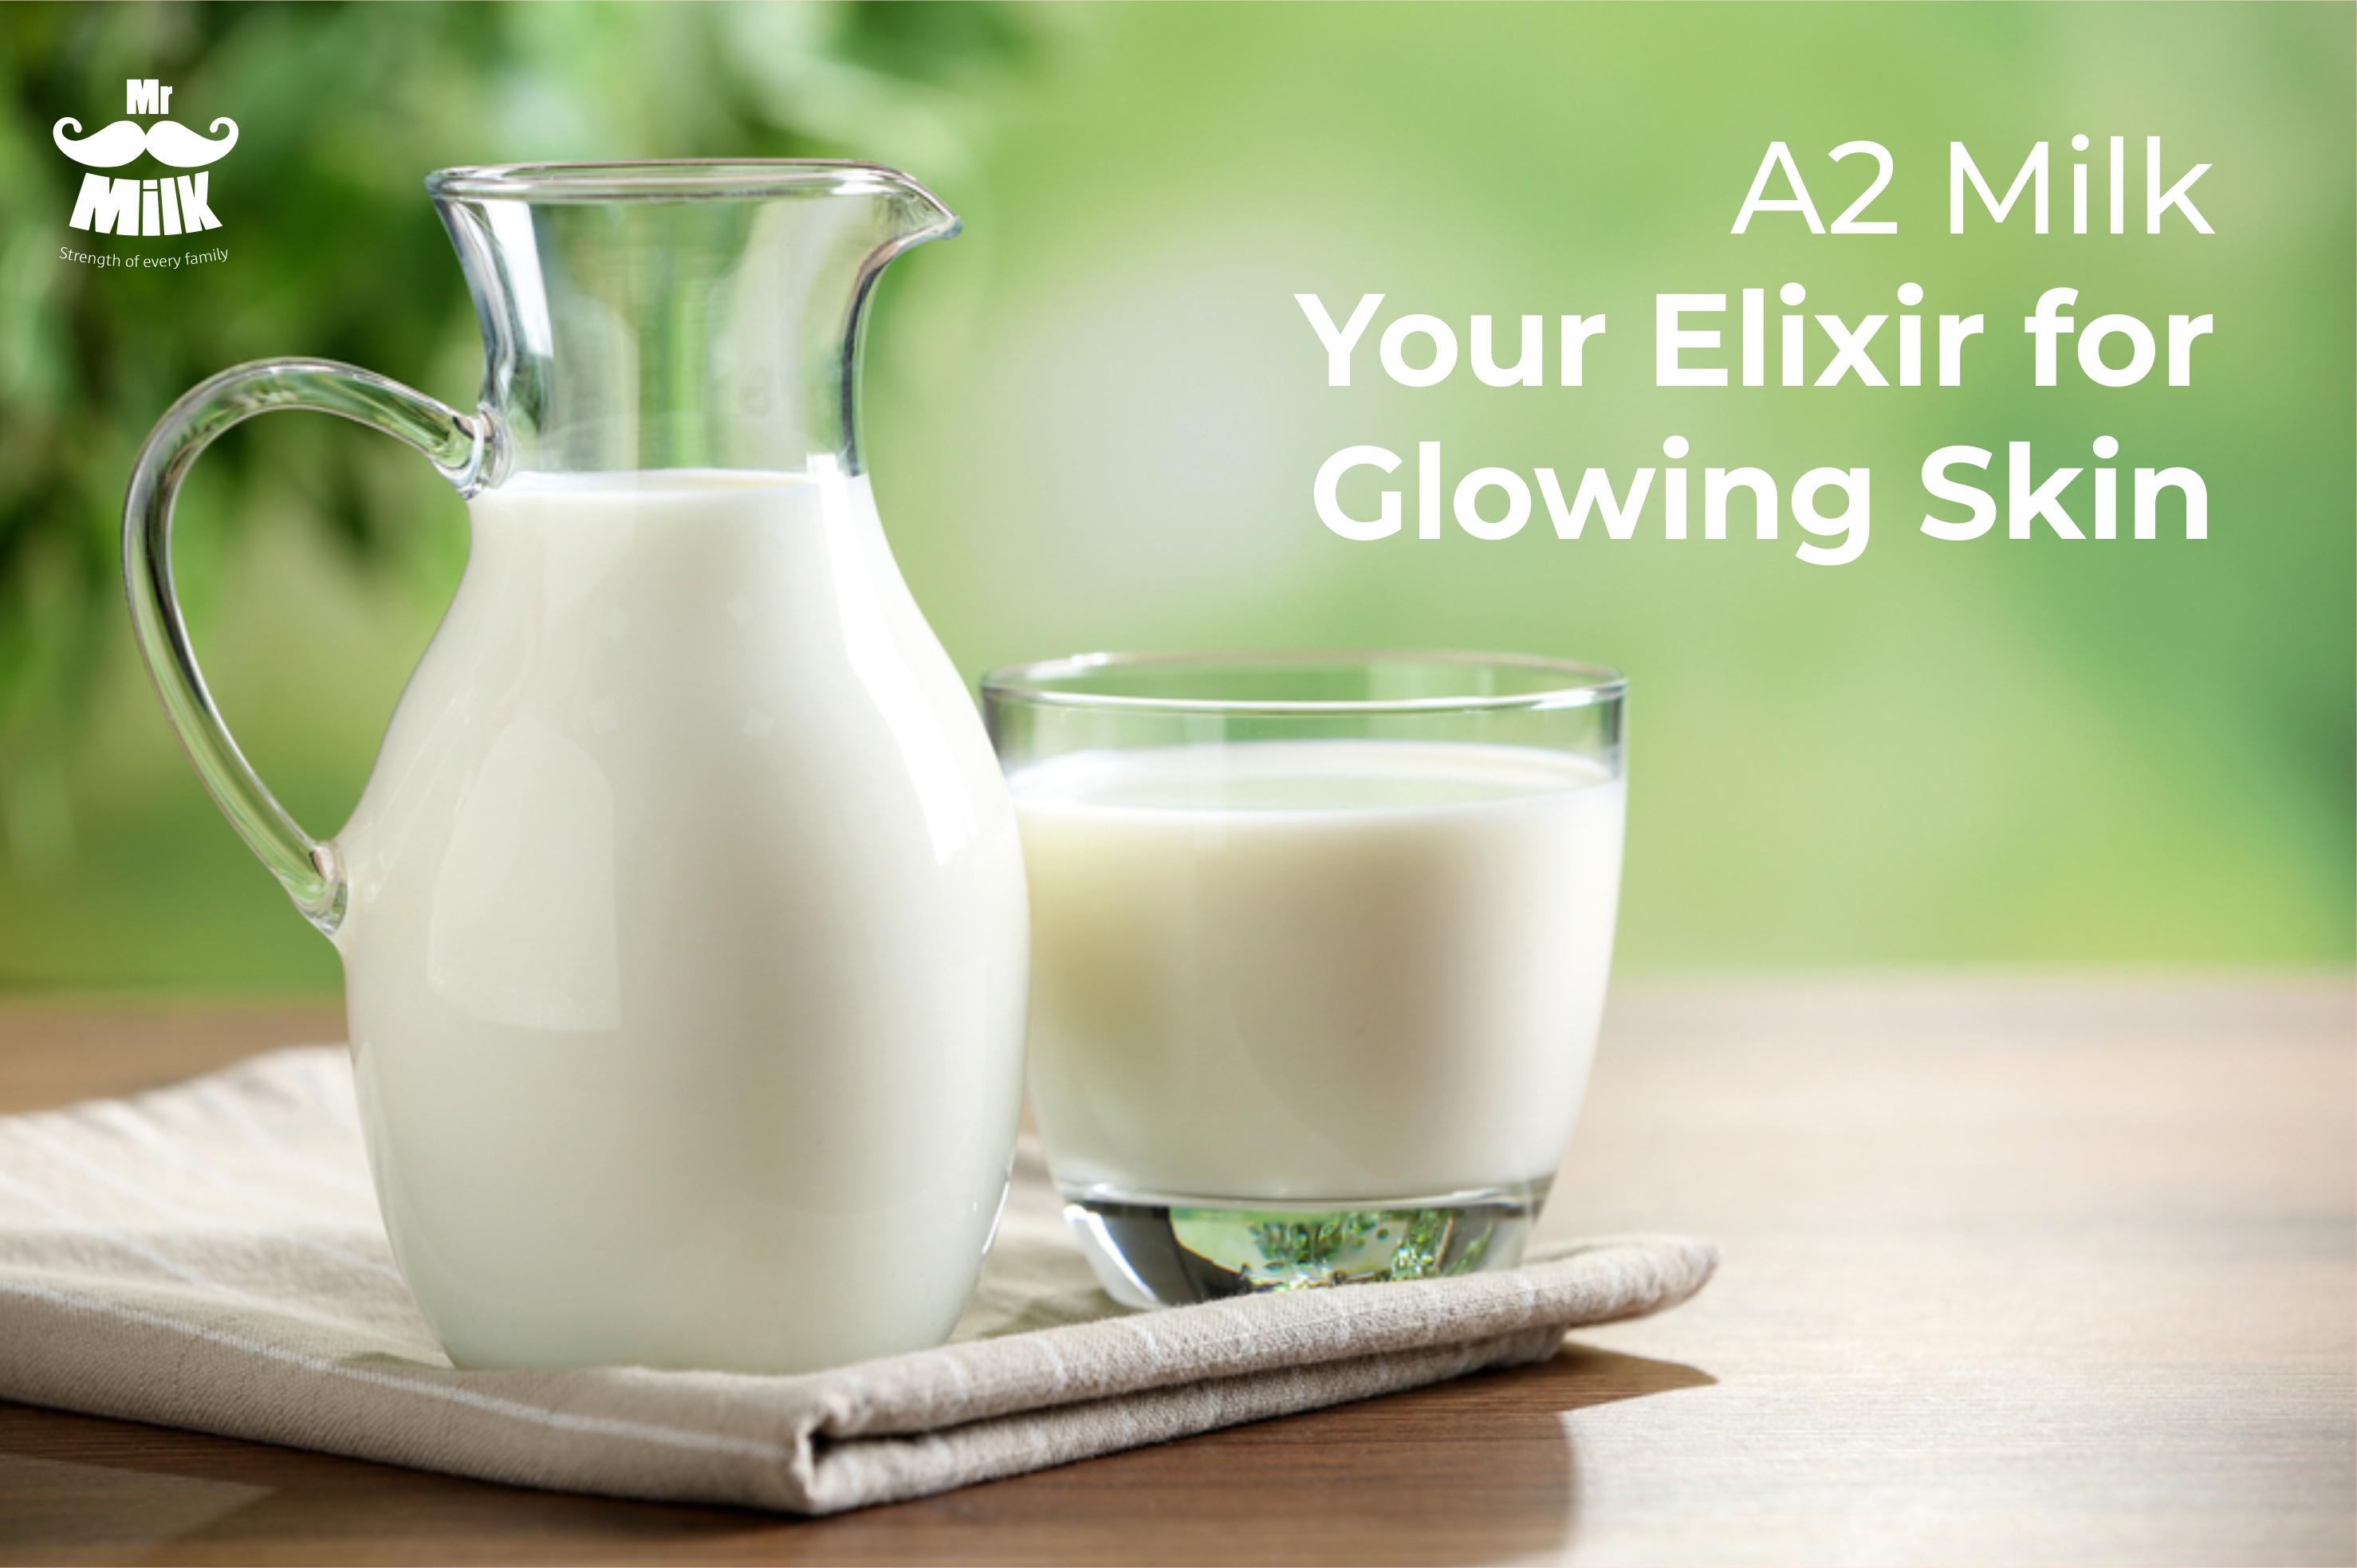 A2 Milk – Your Elixir for Glowing Skin